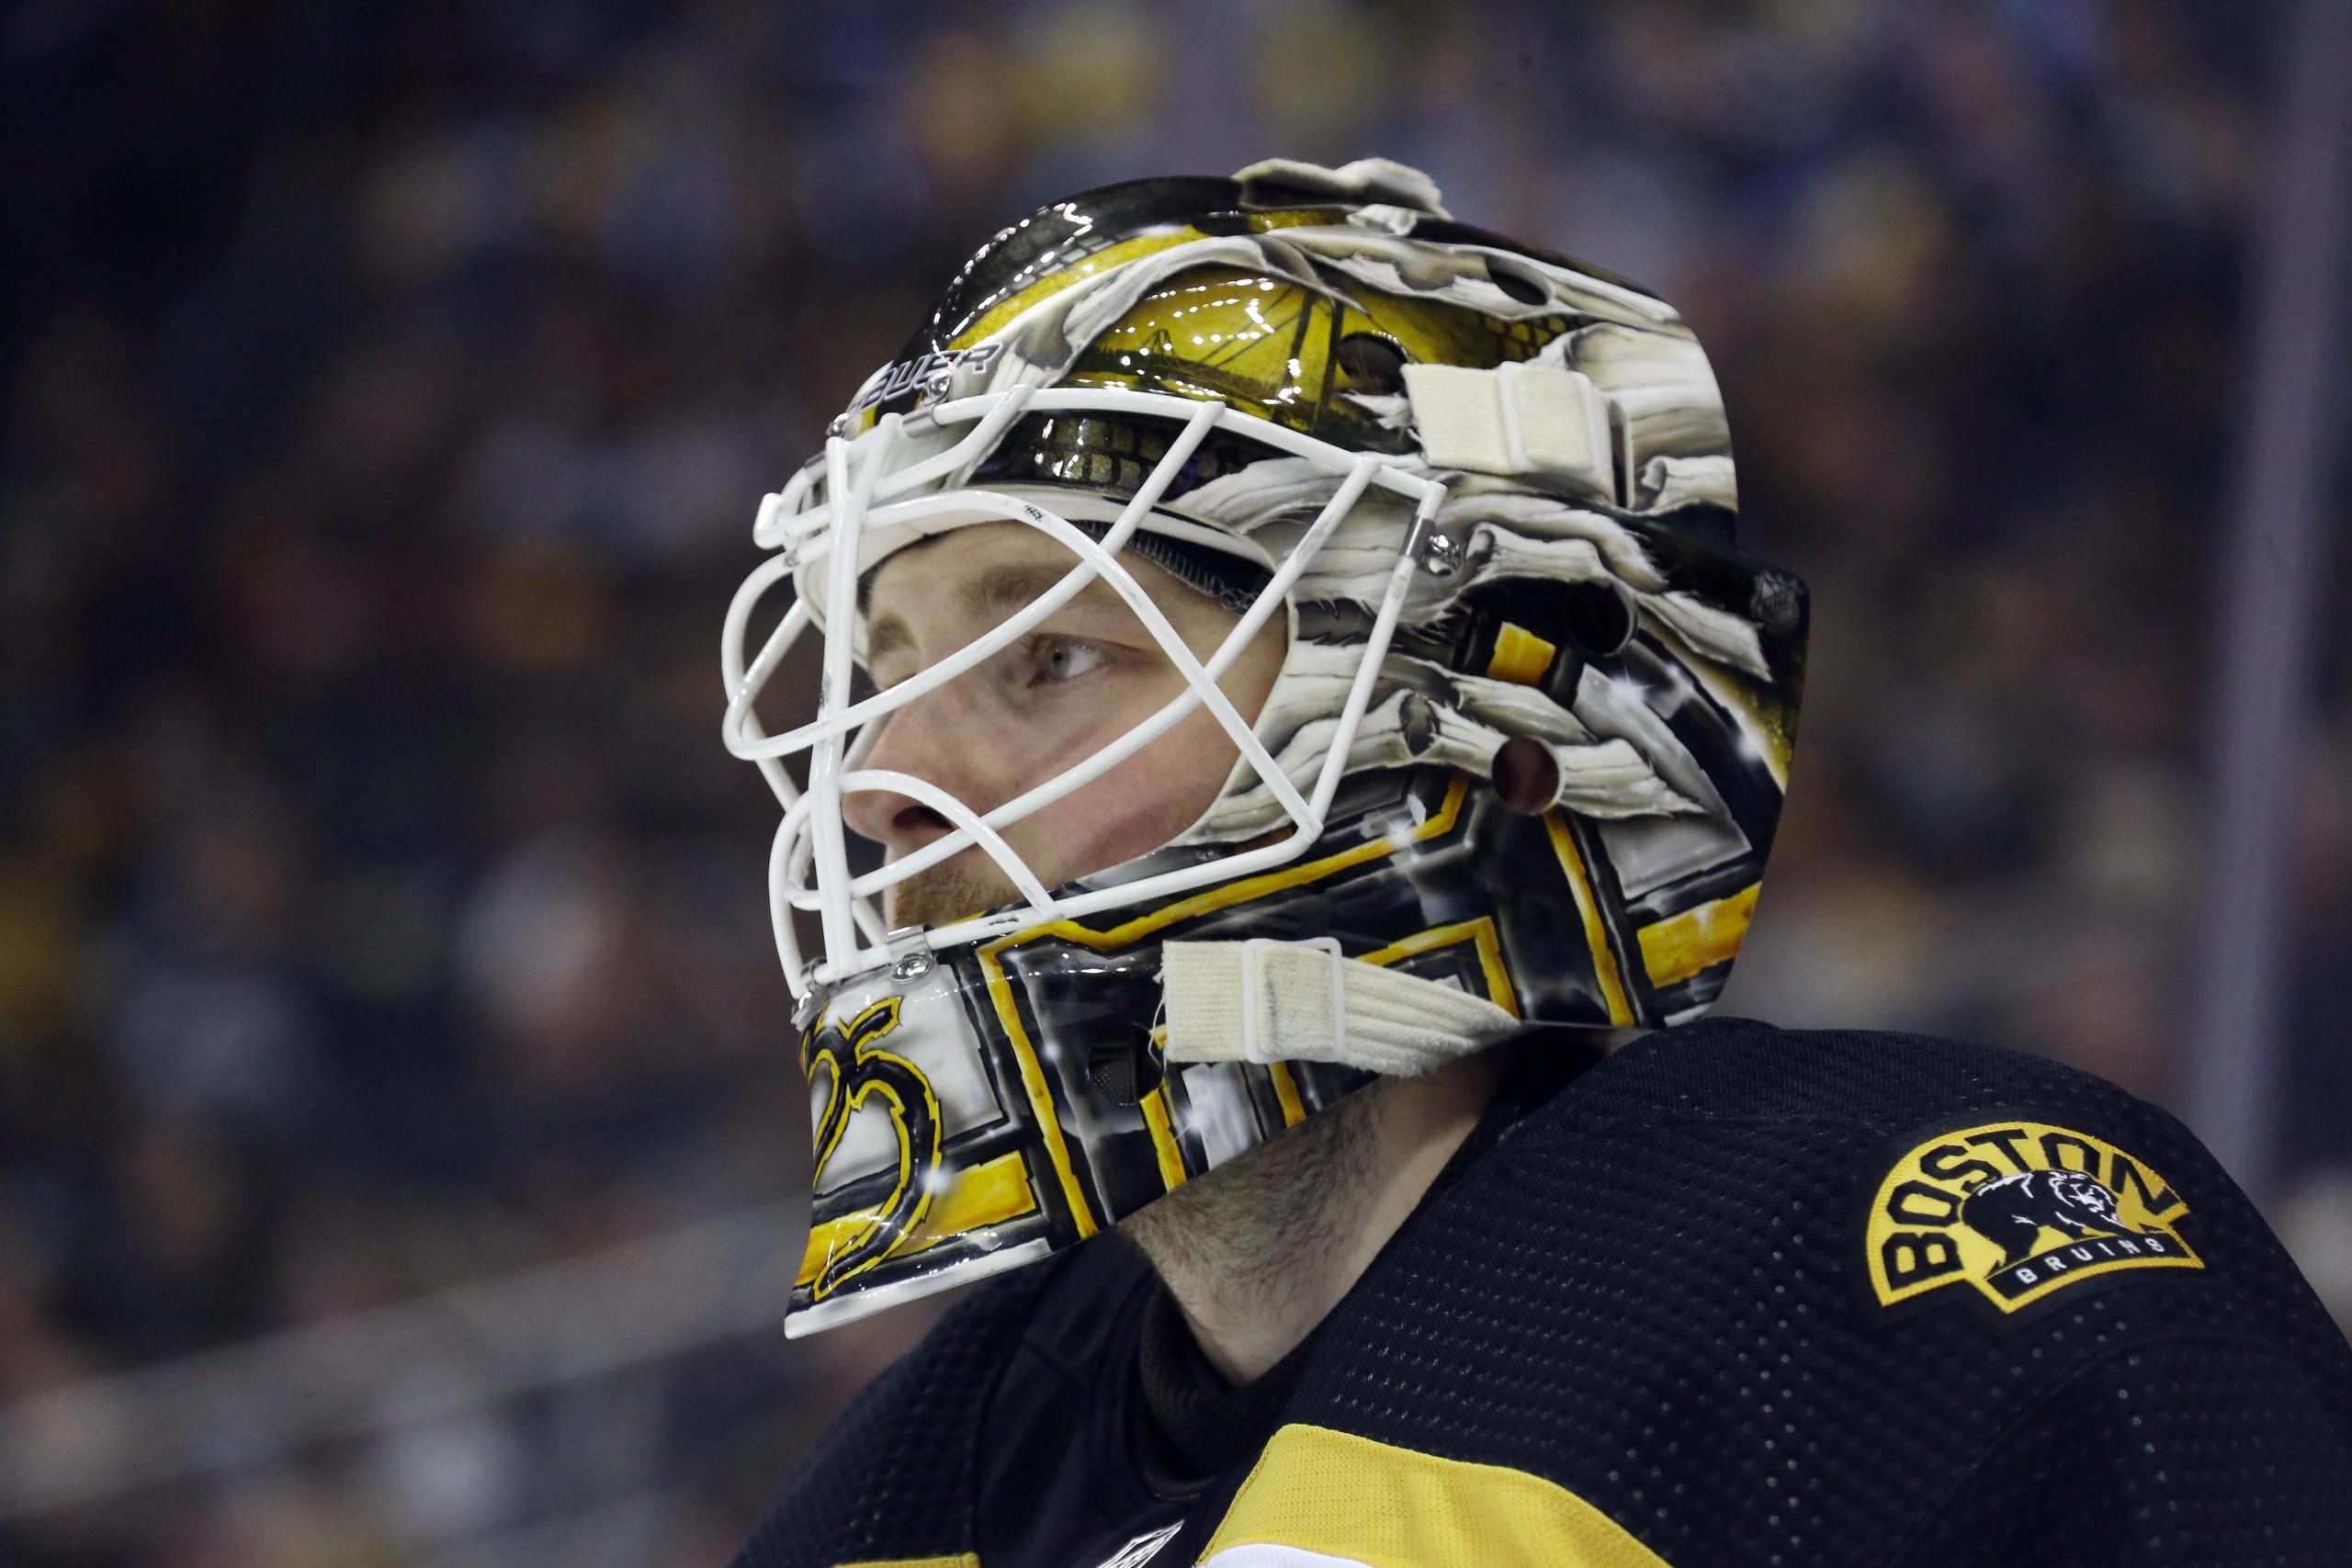 David Backes in black and gold will make Atlantic opponents black